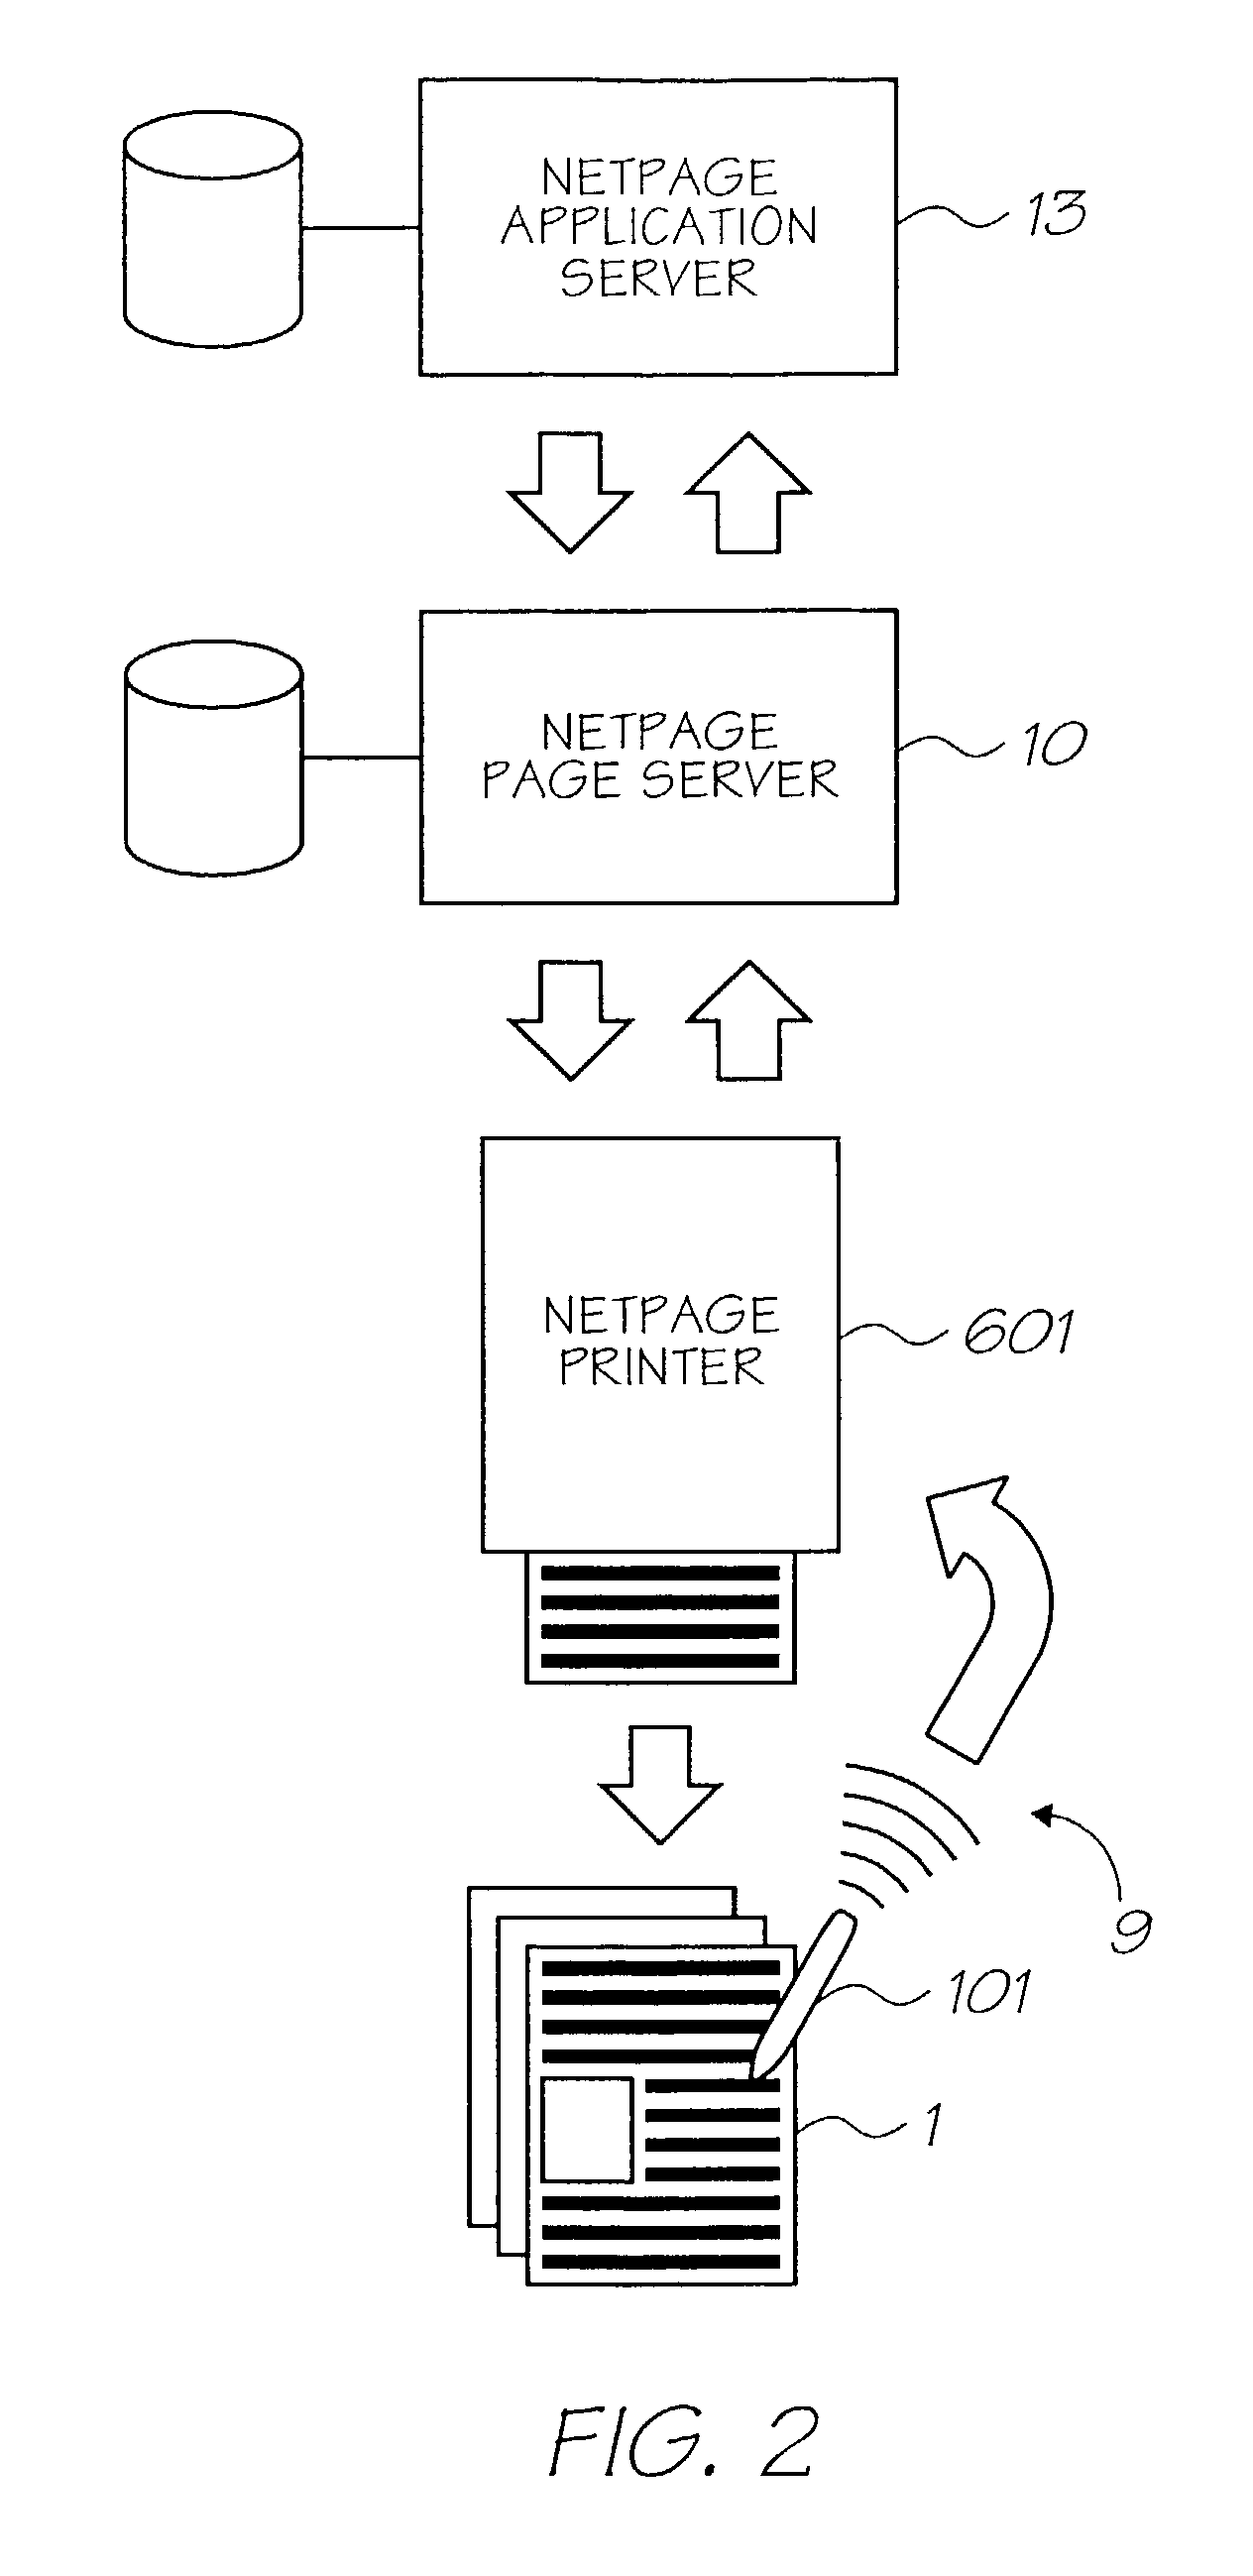 Handwritten text capture via interface surface having coded marks